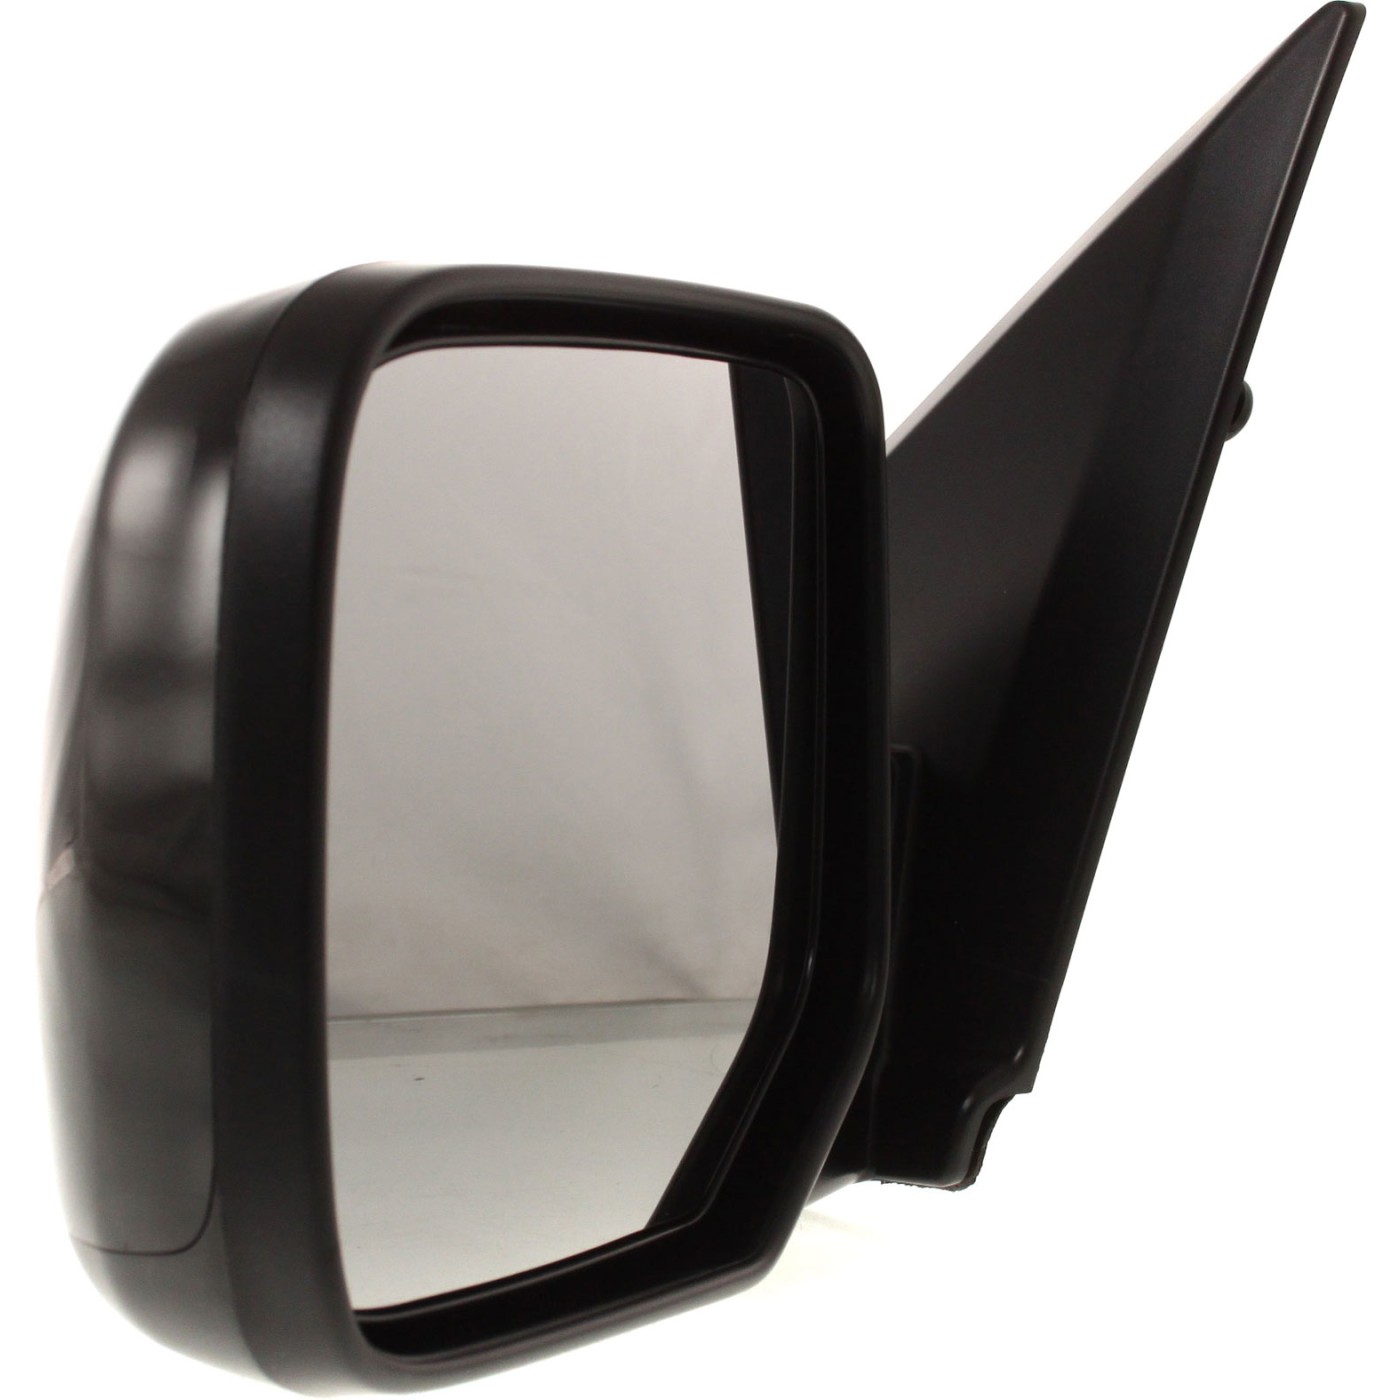 Power Mirror For 2009-2015 Honda Pilot Driver Side Heated Textured Black | eBay 2007 Honda Pilot Driver Side Mirror Replacement